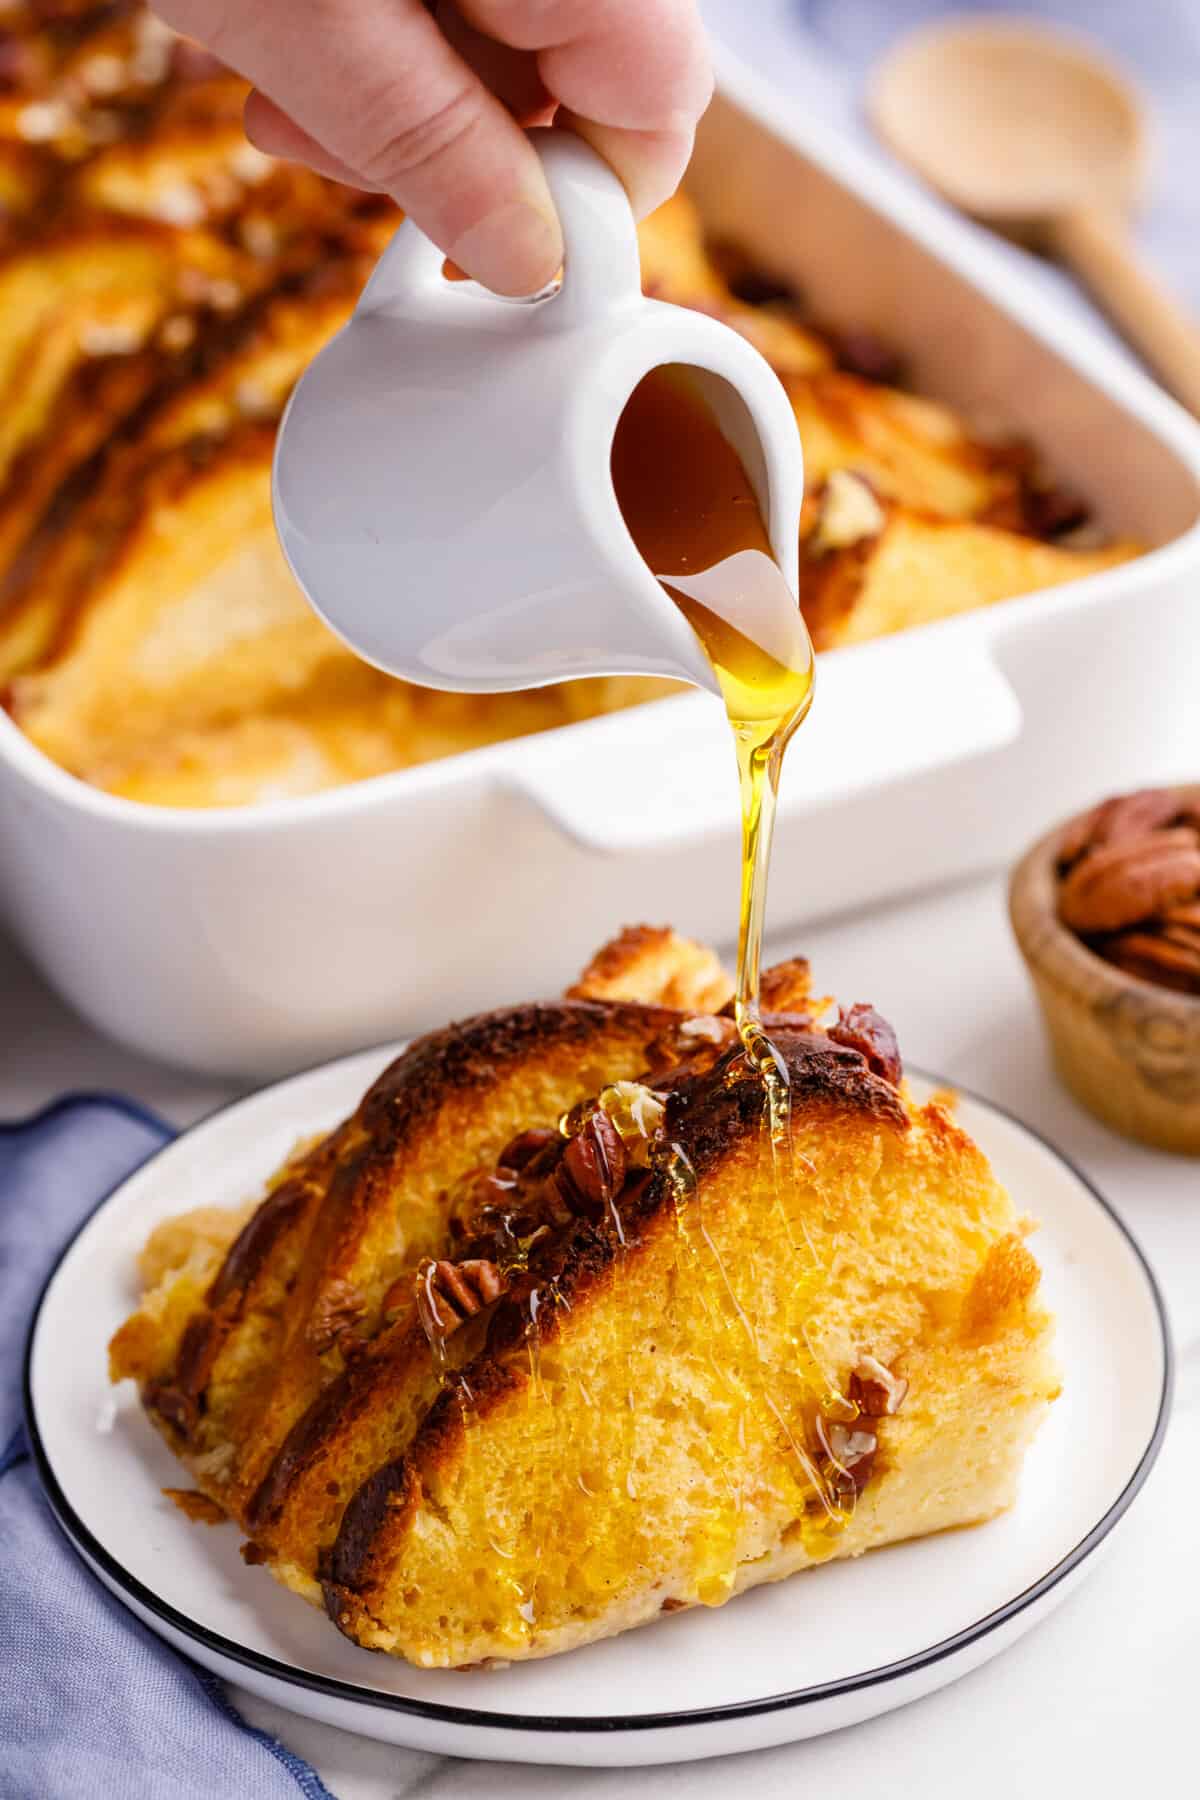 syrup pouring on top of a serving of french toast casserole sitting on a white round plate